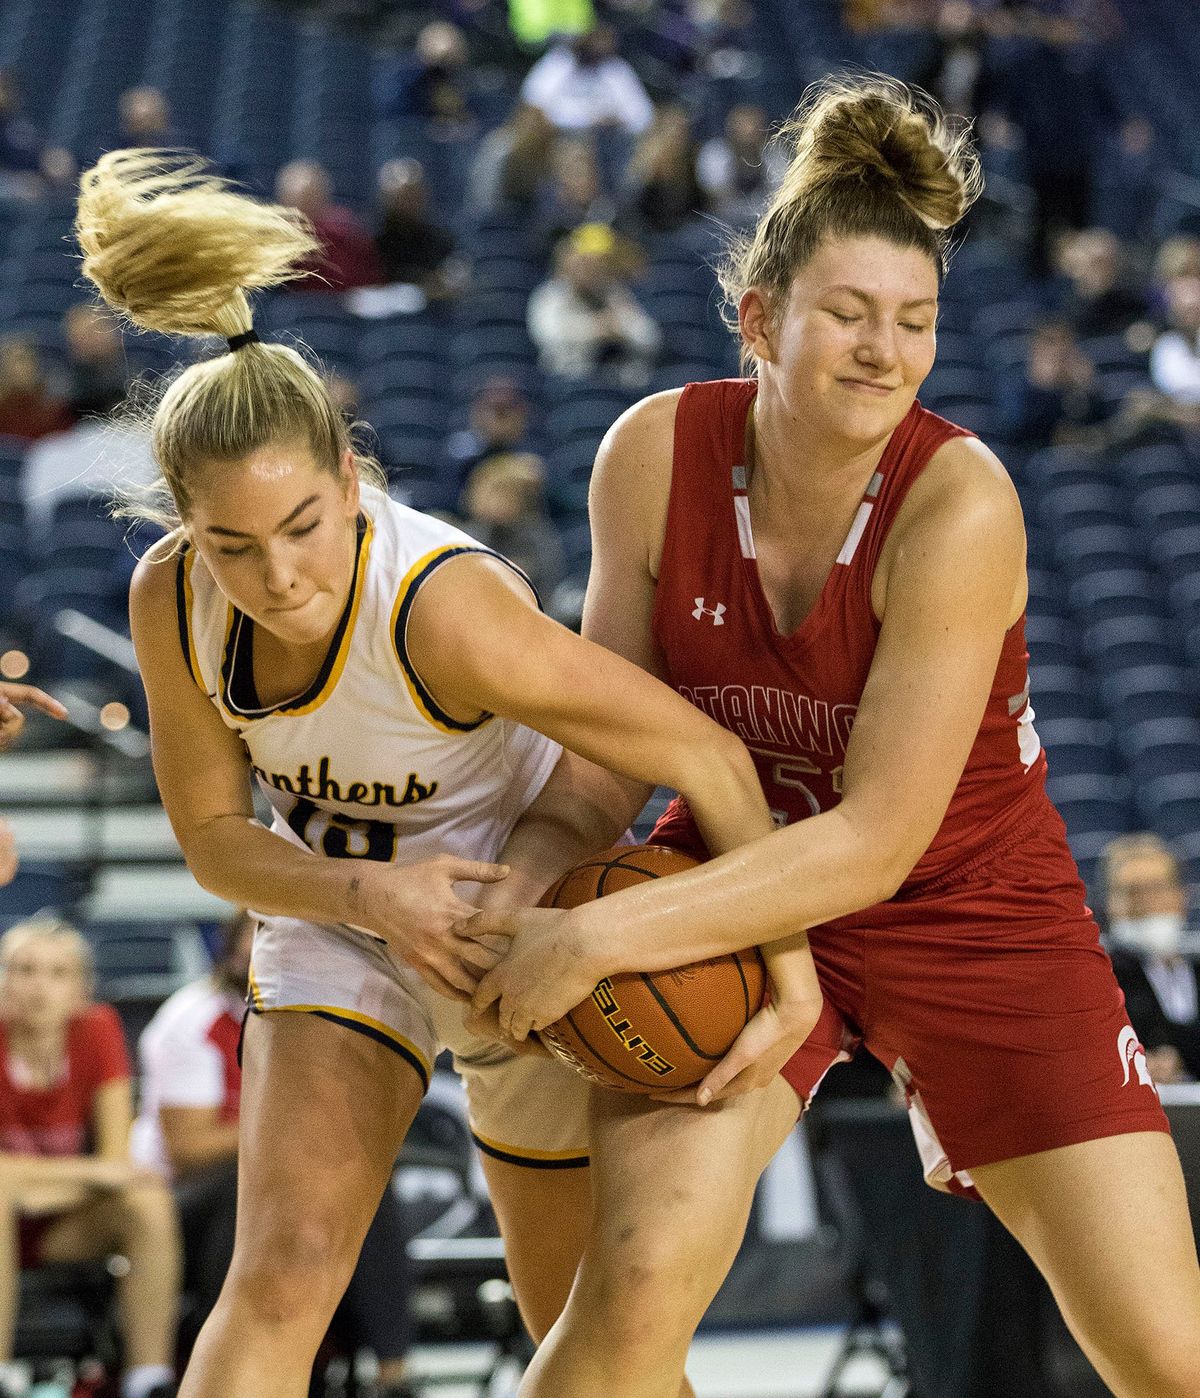 Mead’s Natalie Braun, left, battles Stanwood’s Vivienne Berrett for a rebound during action in the 3A Girls State Basketball Tournament in Tacoma, Wash. on Thursday, March 3, 2022. Mead won the game 52-33 to advance to the semi-finals. (Photo by Patrick Hagerty)  (Patrick Hagerty)